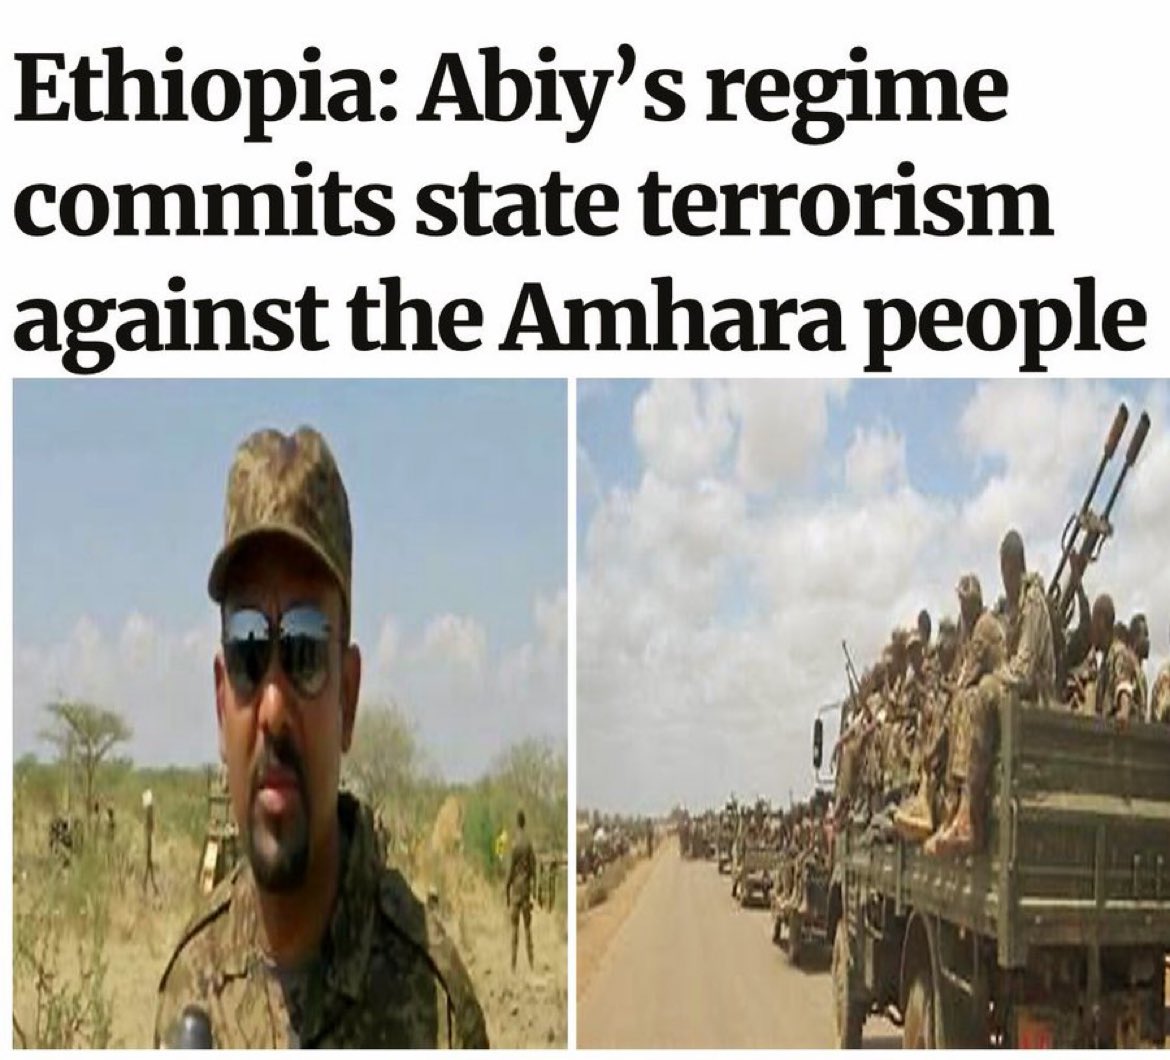 🚨The strength of the Amhara people's/#Fano’s spirit cannot be suppressed. @AbiyAhmedAli, @USEmbassyAddis, our Amhara resistance is a testament to our determination to end the #AmharaGenocide. The world must stand with us for justice and accountability. #WarOnAmhara 
@amnestyusa